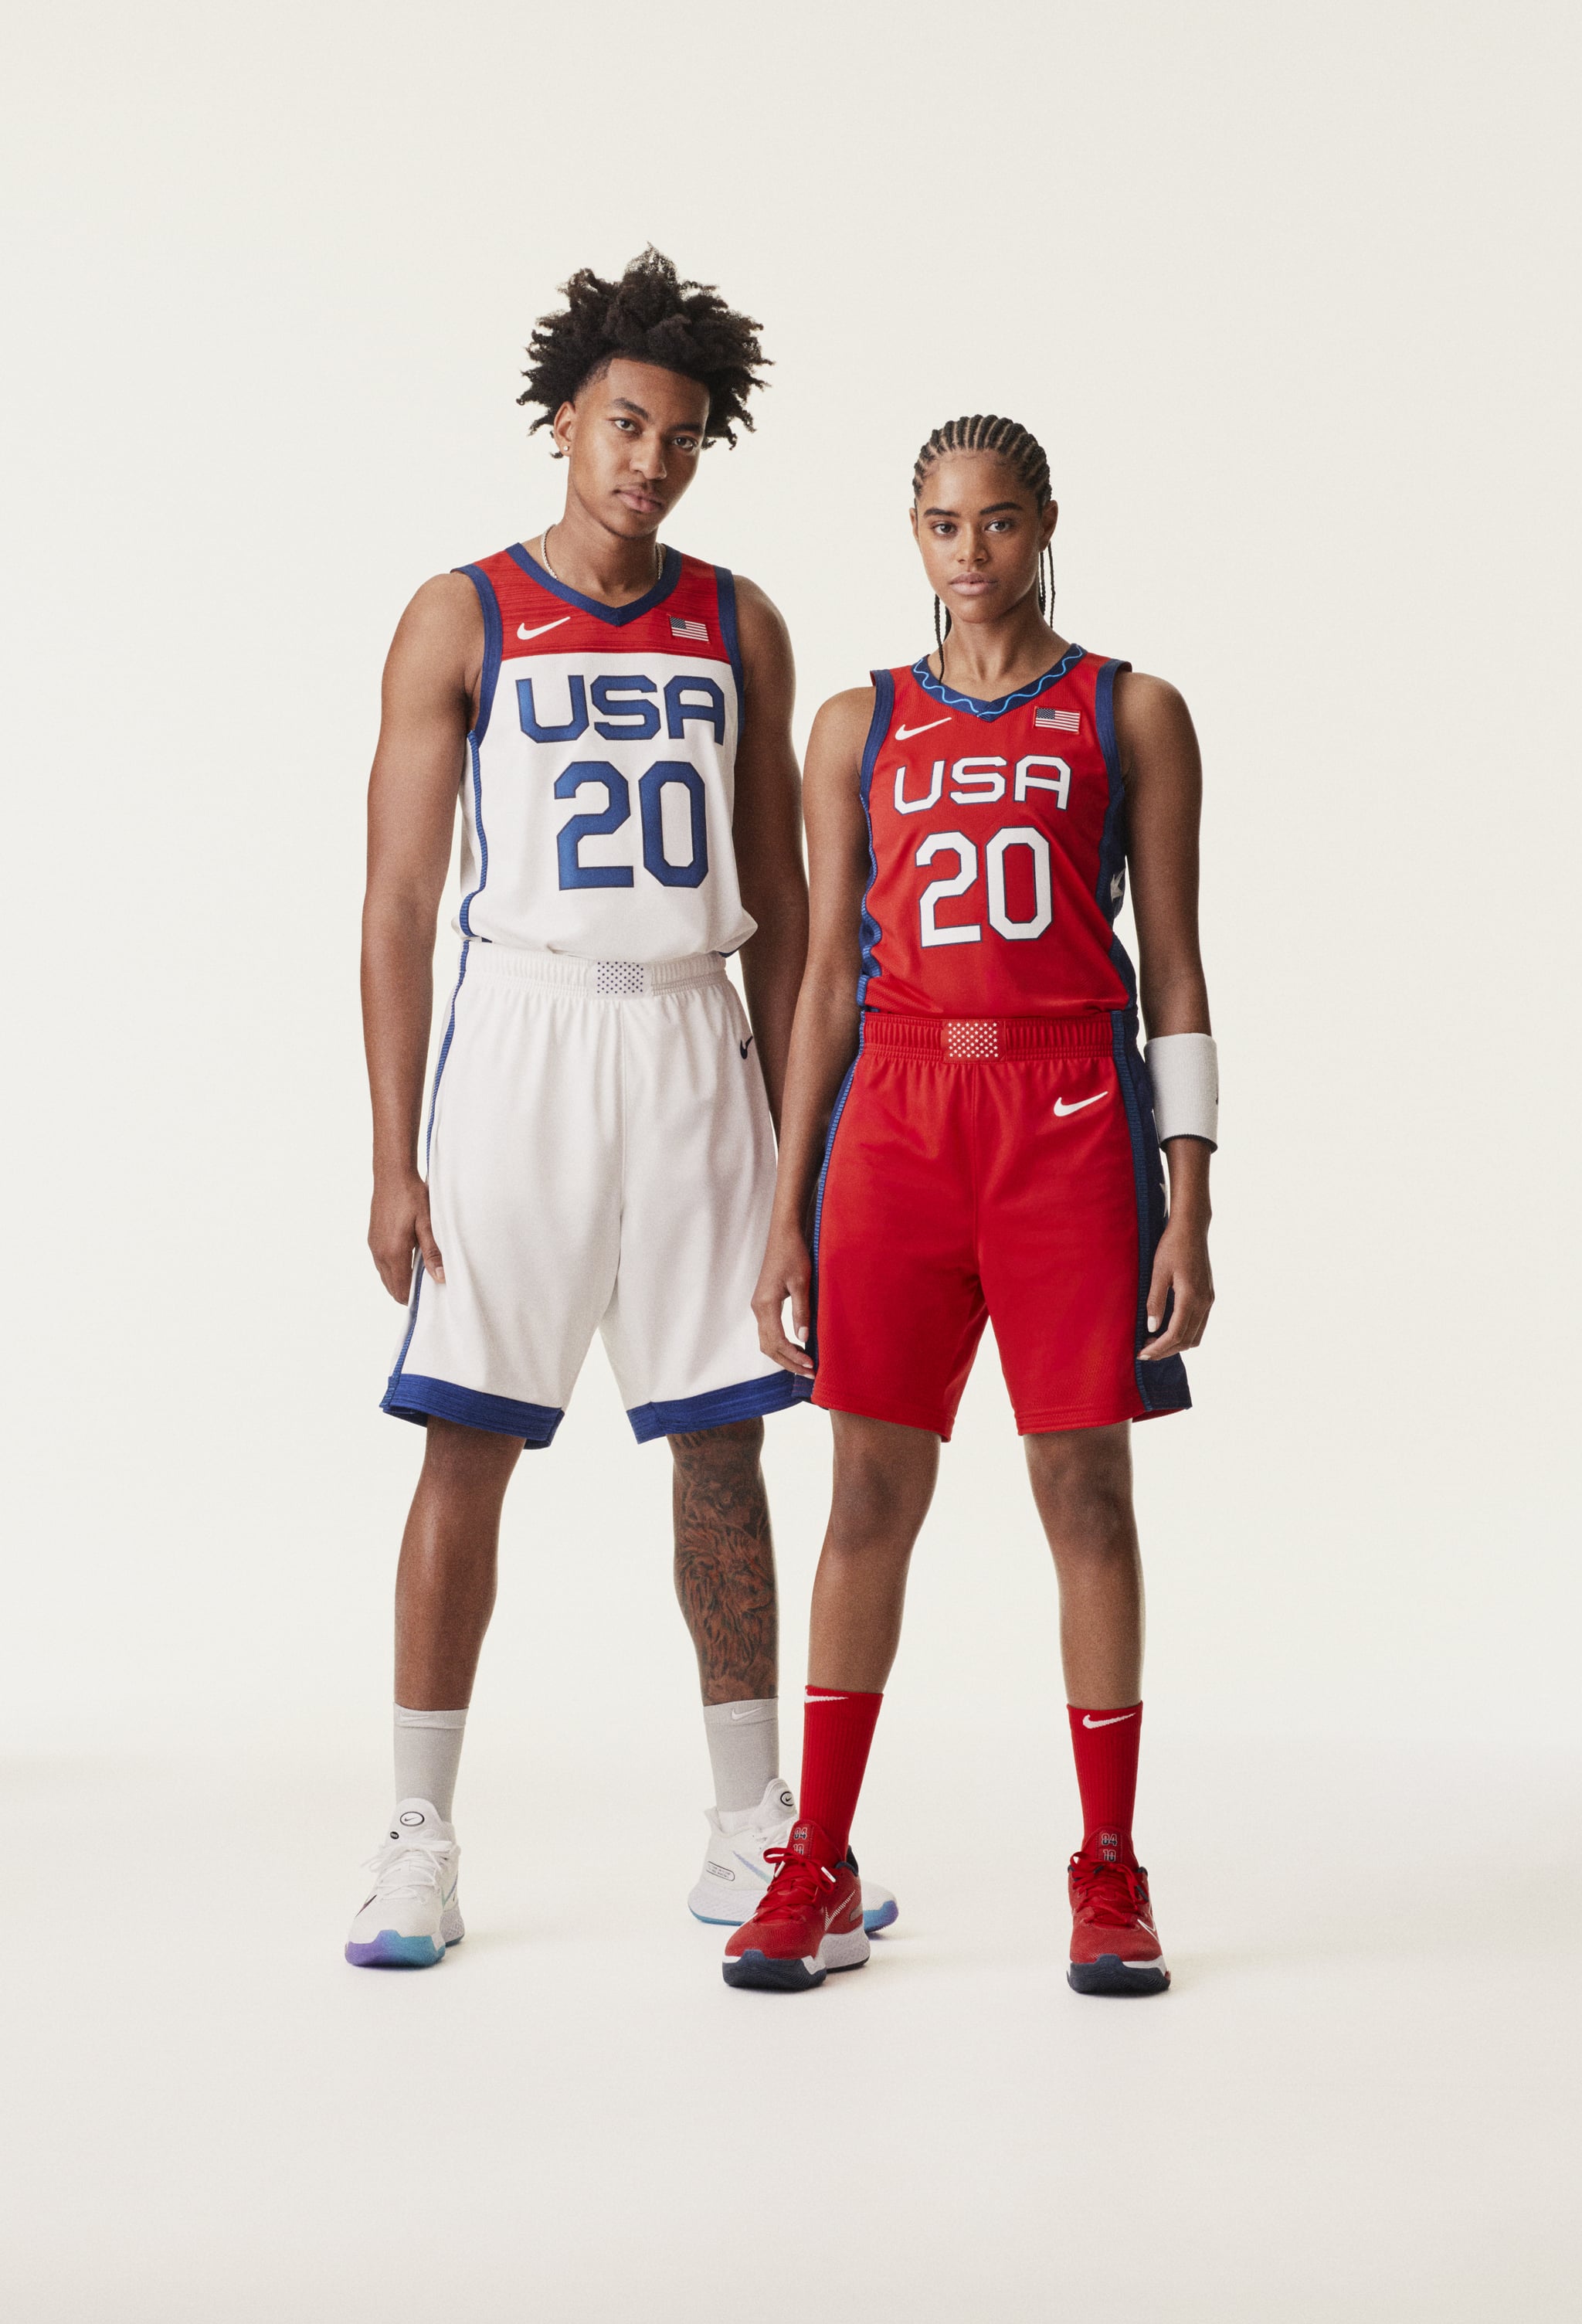 Team Usa 2021 Olympic Basketball Uniforms Skateboarding Soccer Track Nike S 2021 Olympic Uniforms Are So Sharp And Clean Popsugar Fitness Photo 5